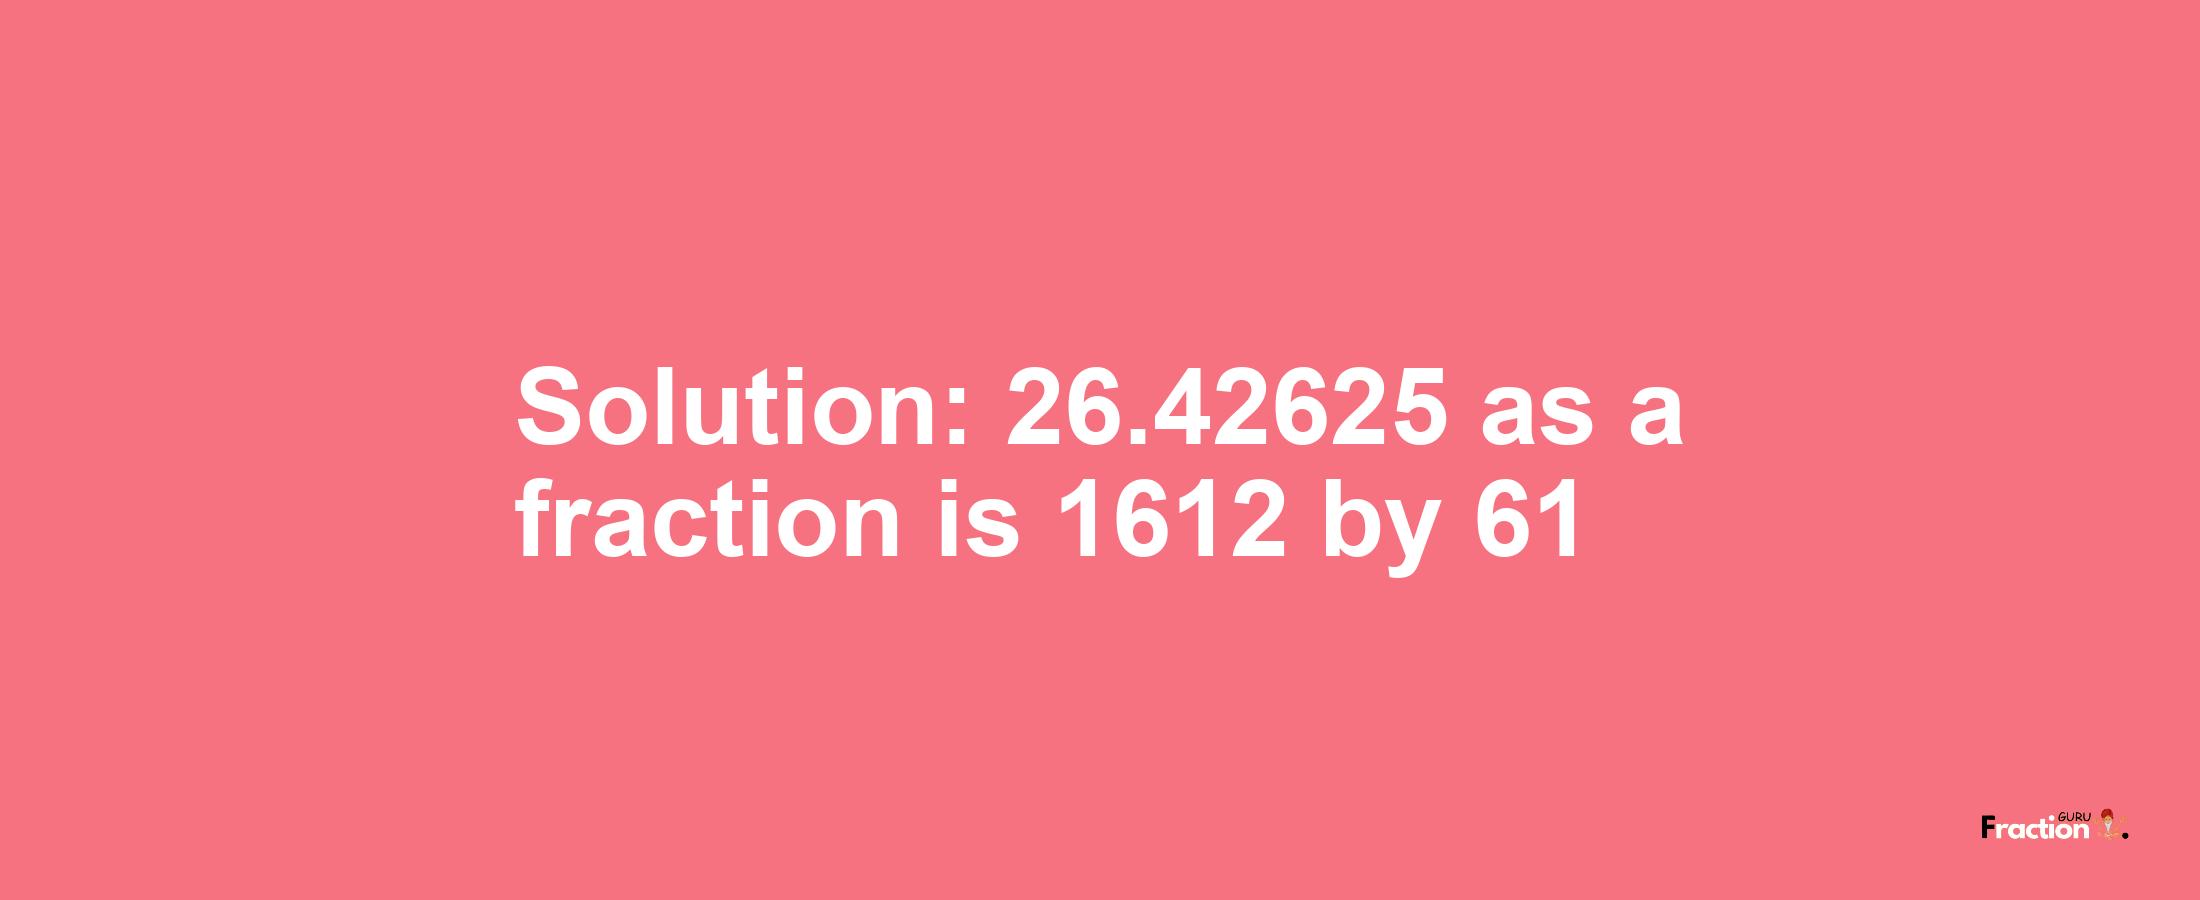 Solution:26.42625 as a fraction is 1612/61